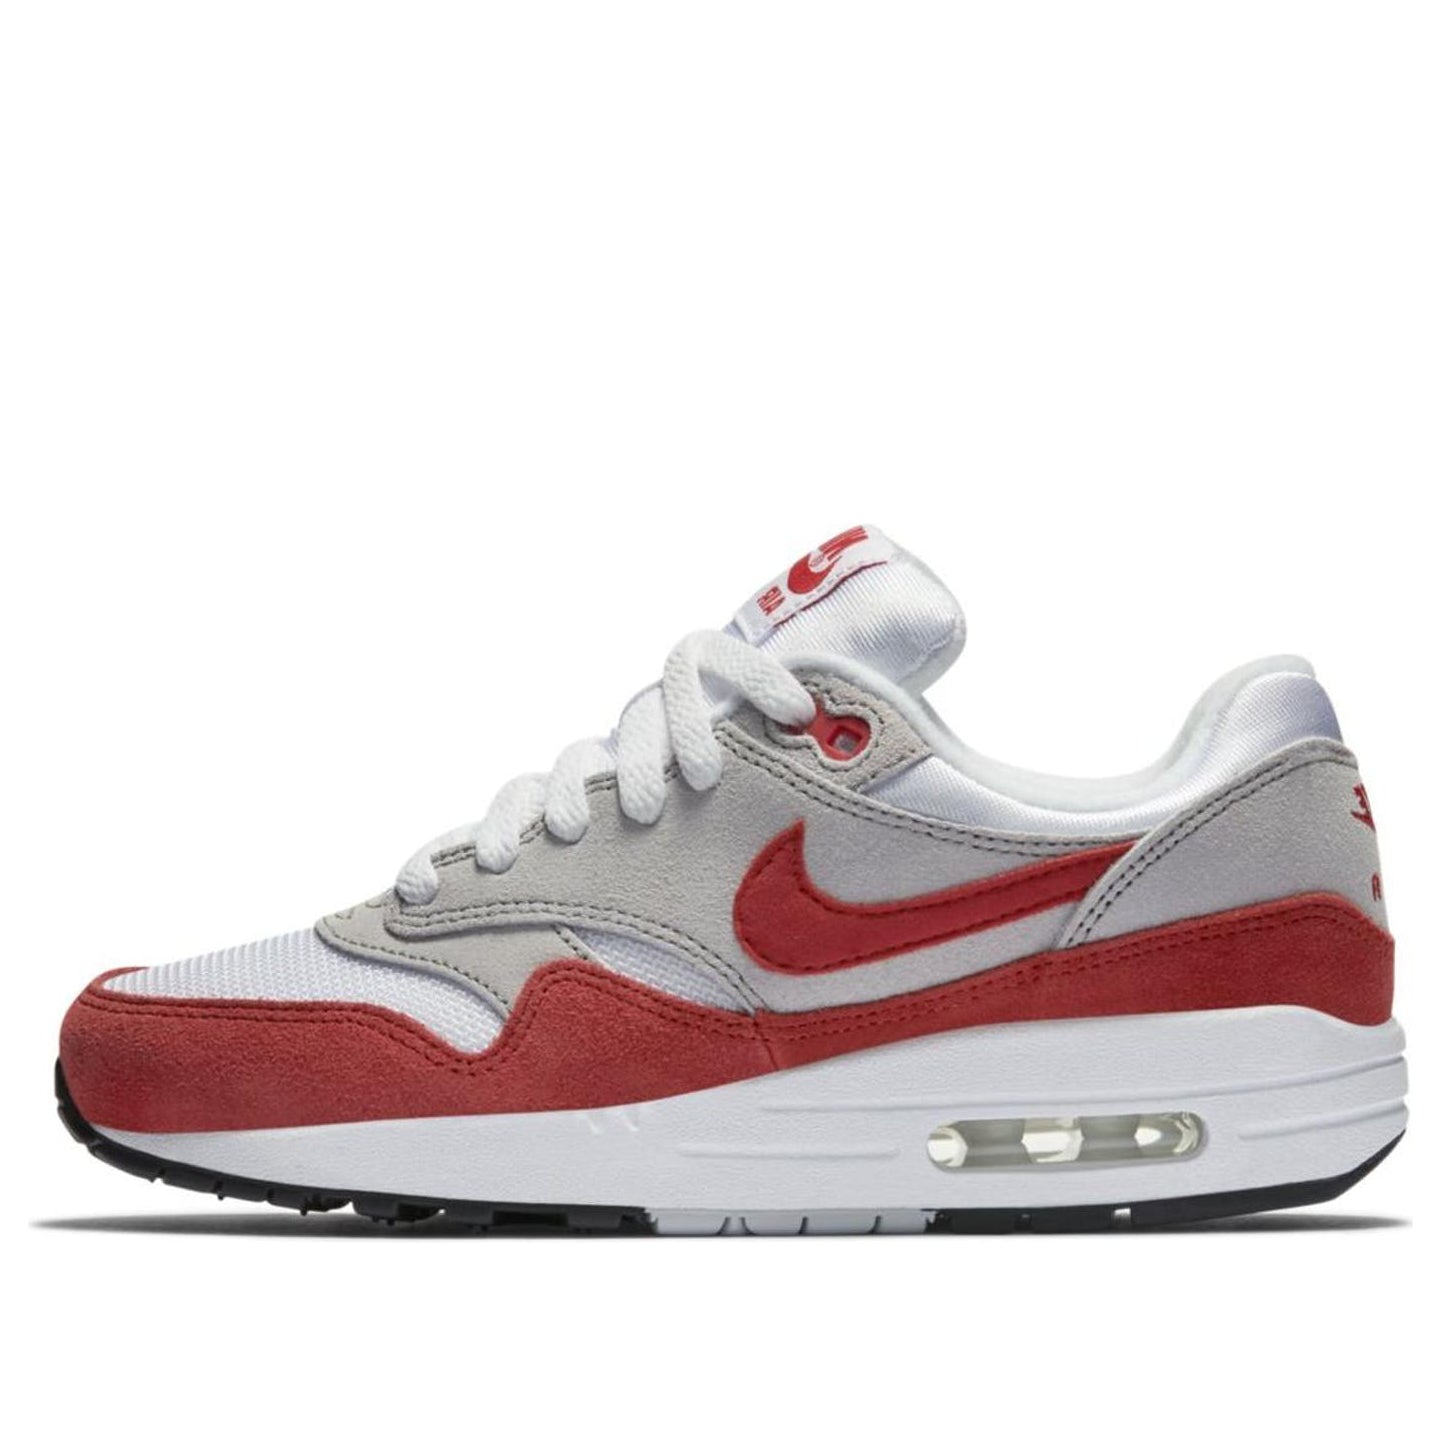 Nike Air Max 1 OG GS 'Challenge Red' White/Chillng Red/Neutral Grey/Black 555766-146 KICKSOVER